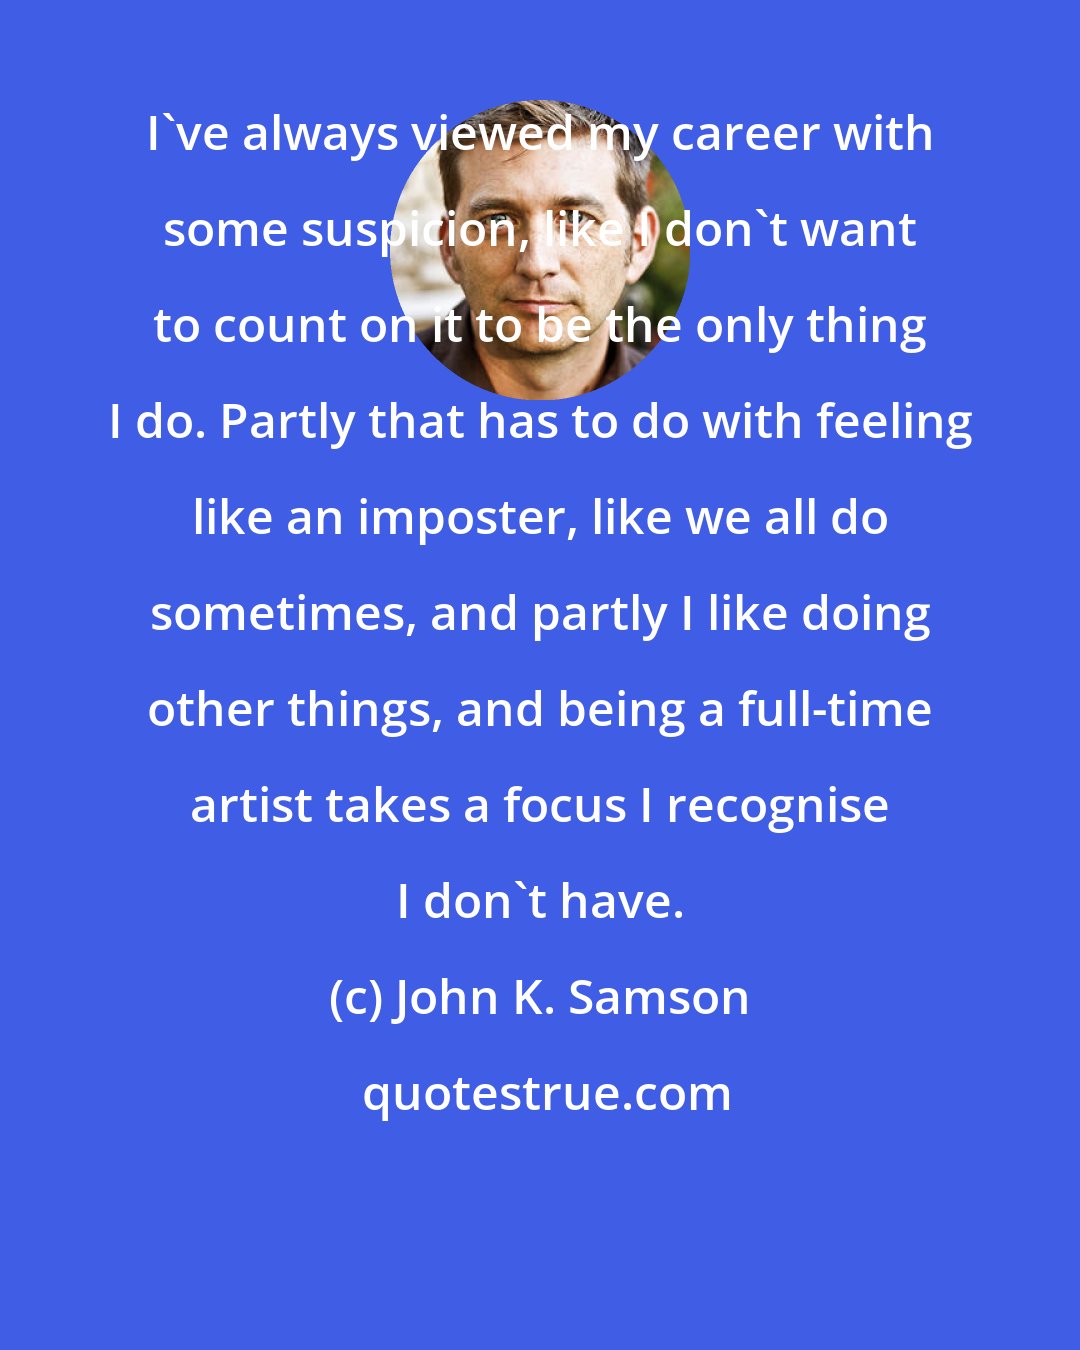 John K. Samson: I've always viewed my career with some suspicion, like I don't want to count on it to be the only thing I do. Partly that has to do with feeling like an imposter, like we all do sometimes, and partly I like doing other things, and being a full-time artist takes a focus I recognise I don't have.